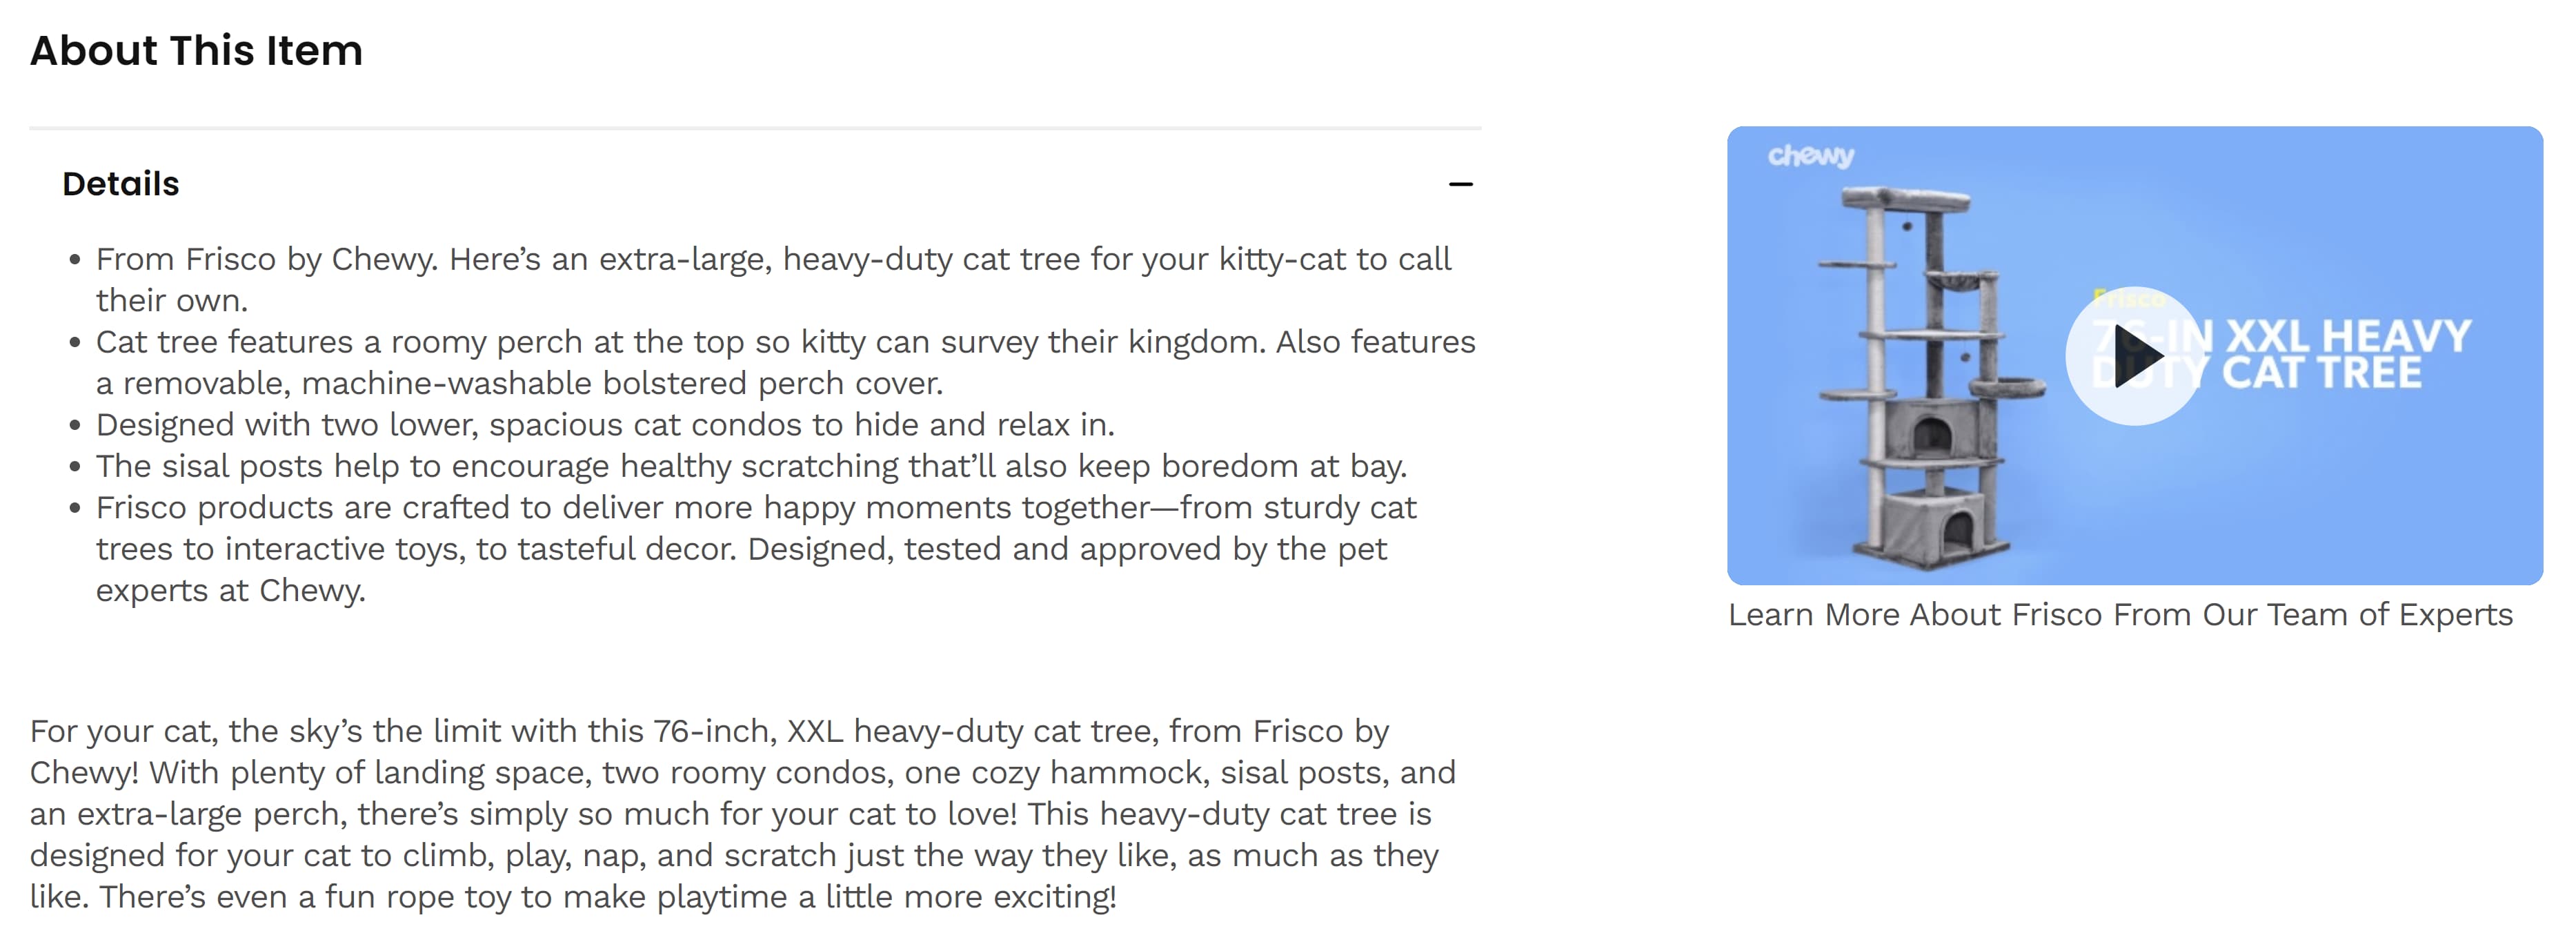 Screenshot of the product attributes of a cat tree.